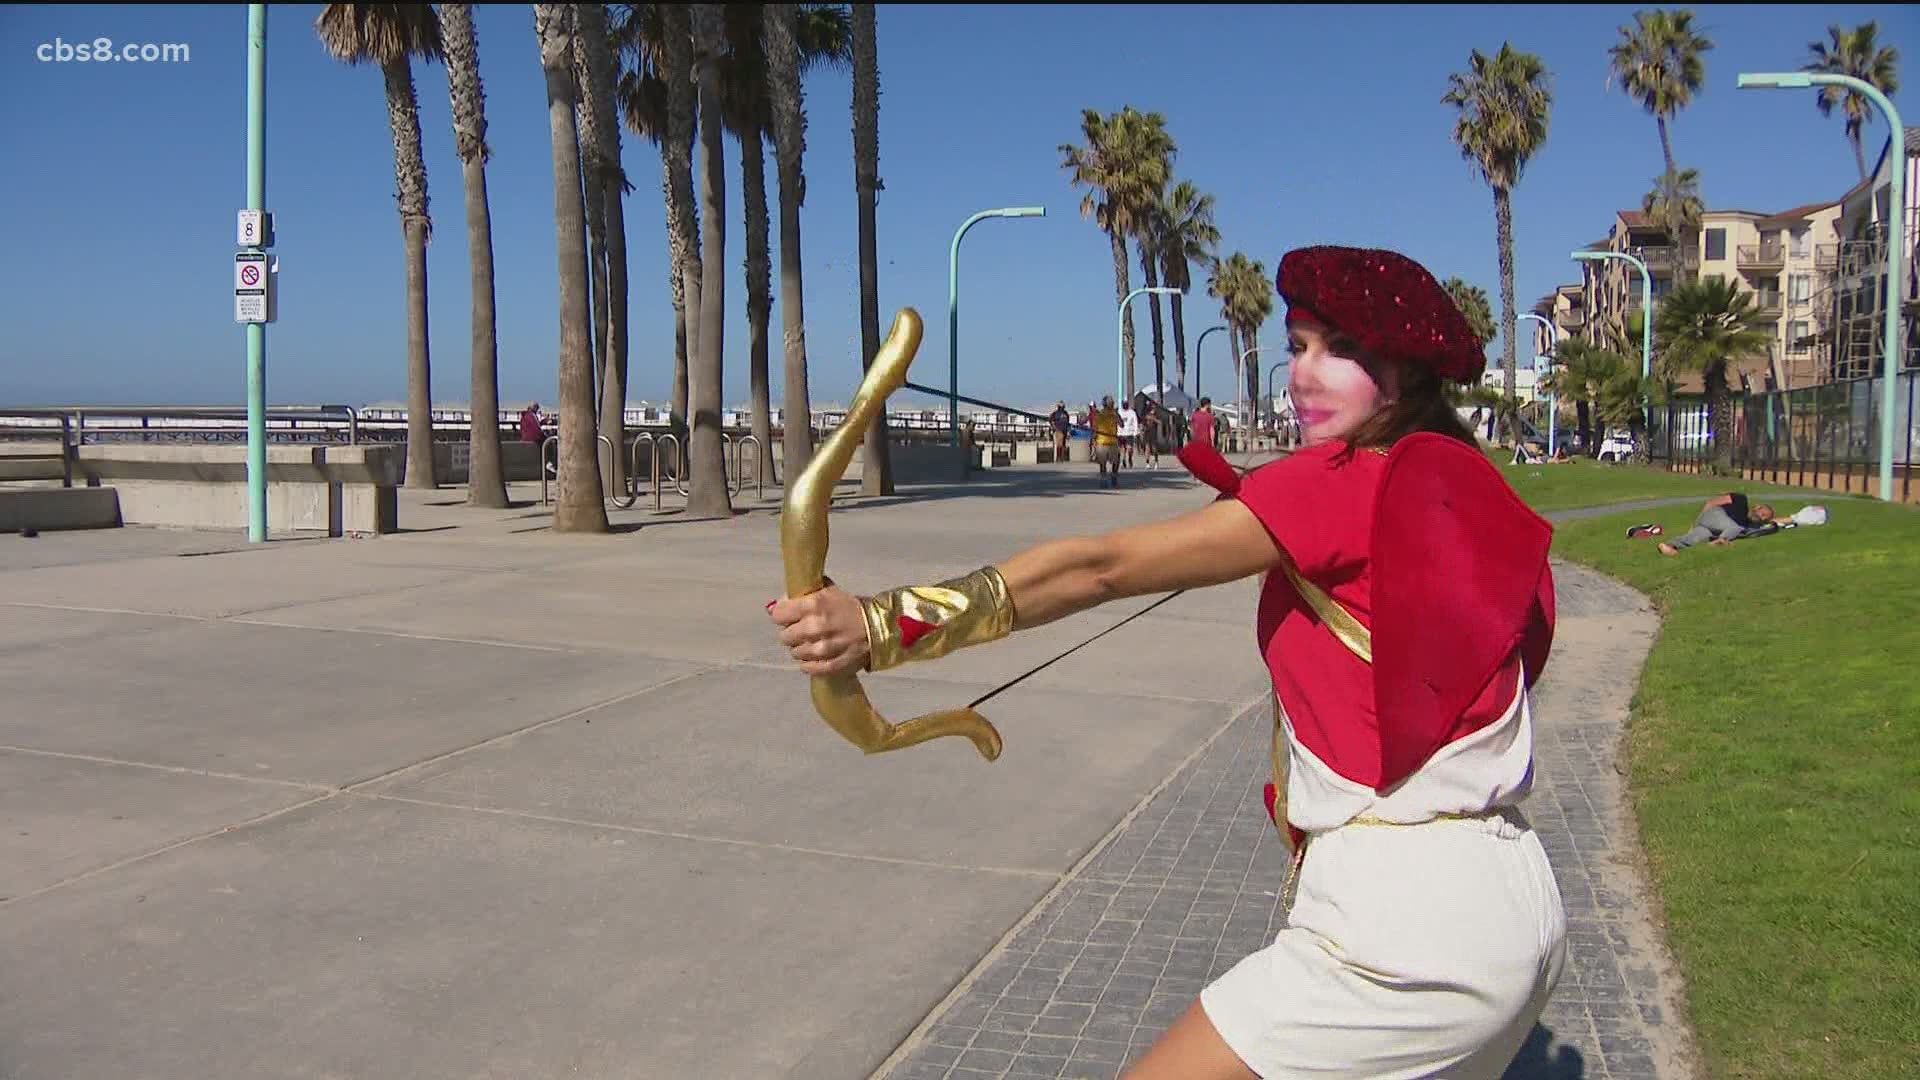 Jenny Milk hit the streets of San Diego as Cupid to see how people were celebrating the holiday of love.